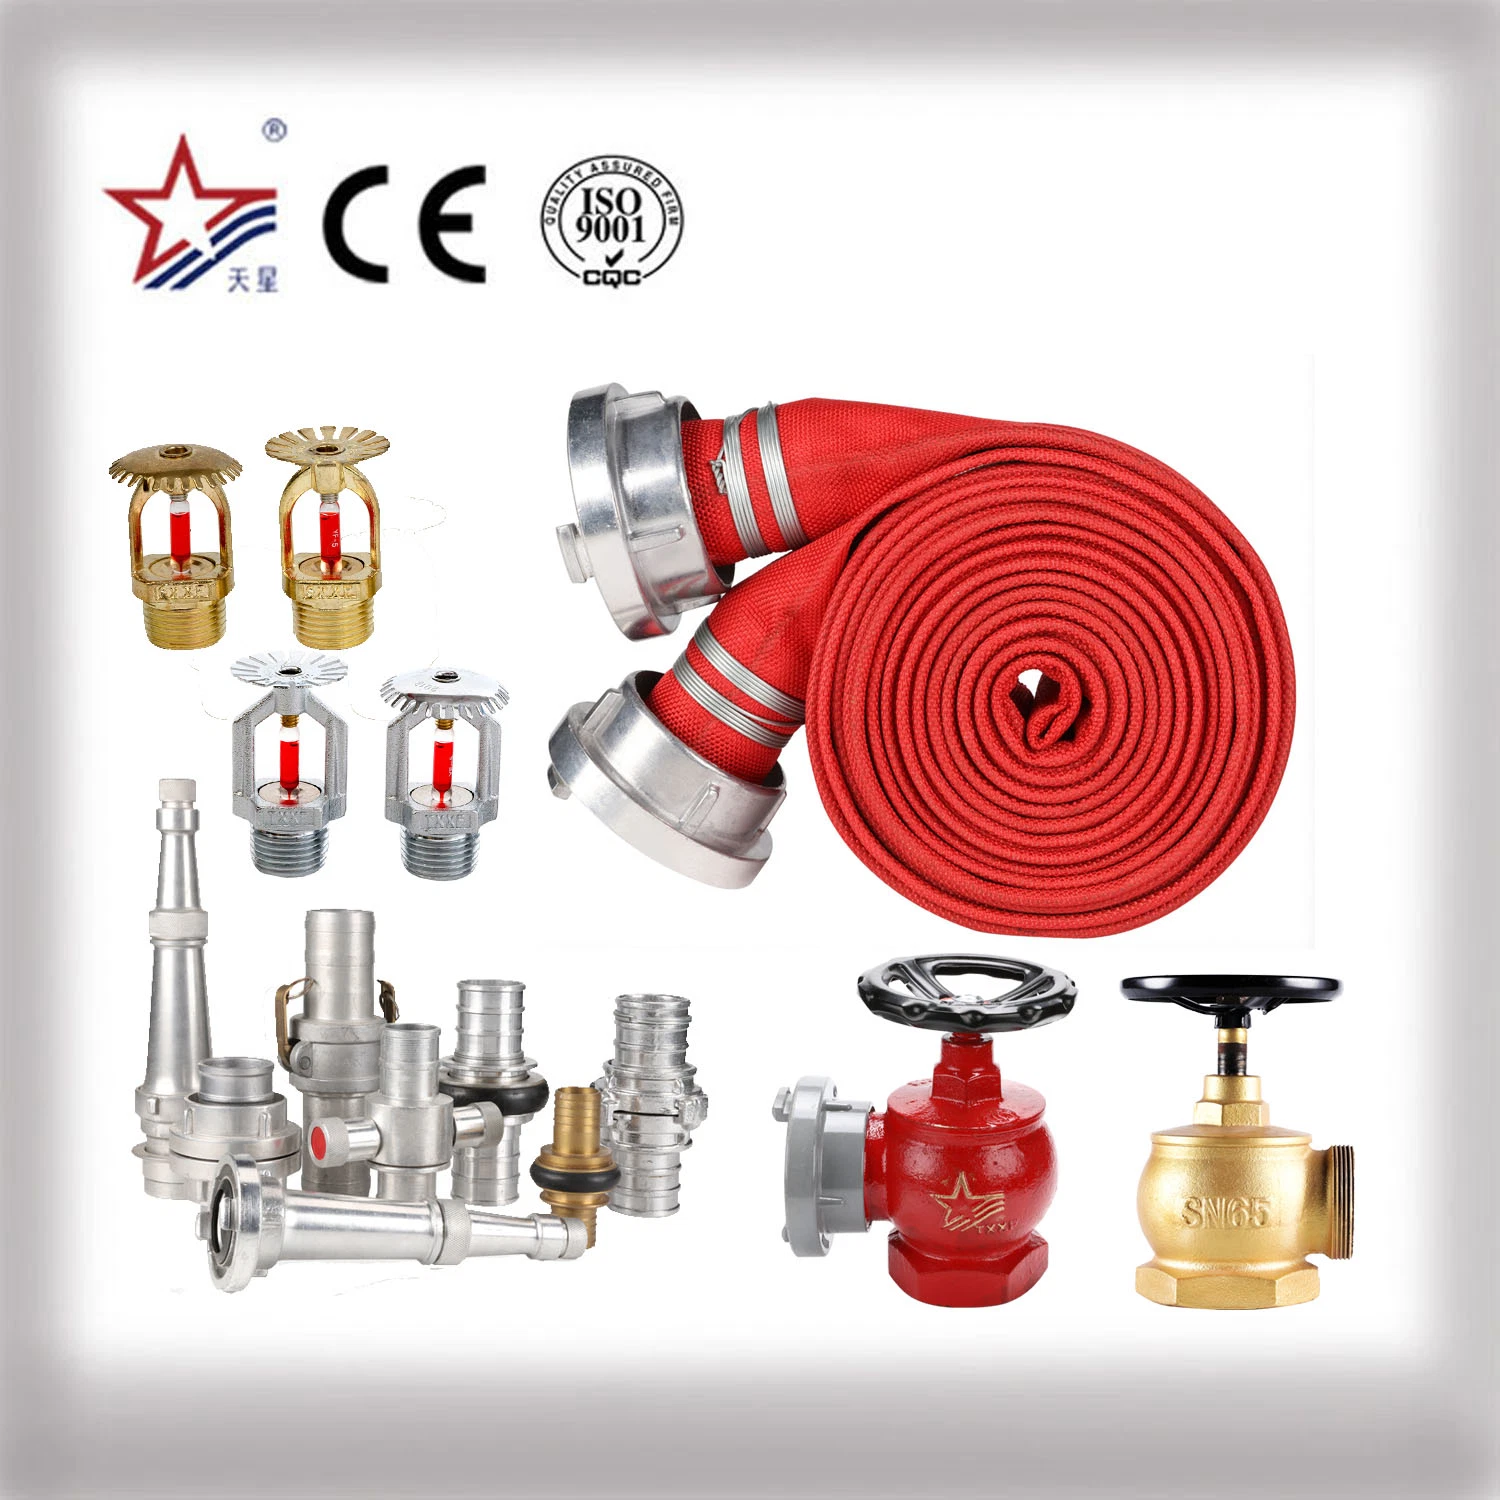 Fire Coupling and Other Fir Fighting Equipment